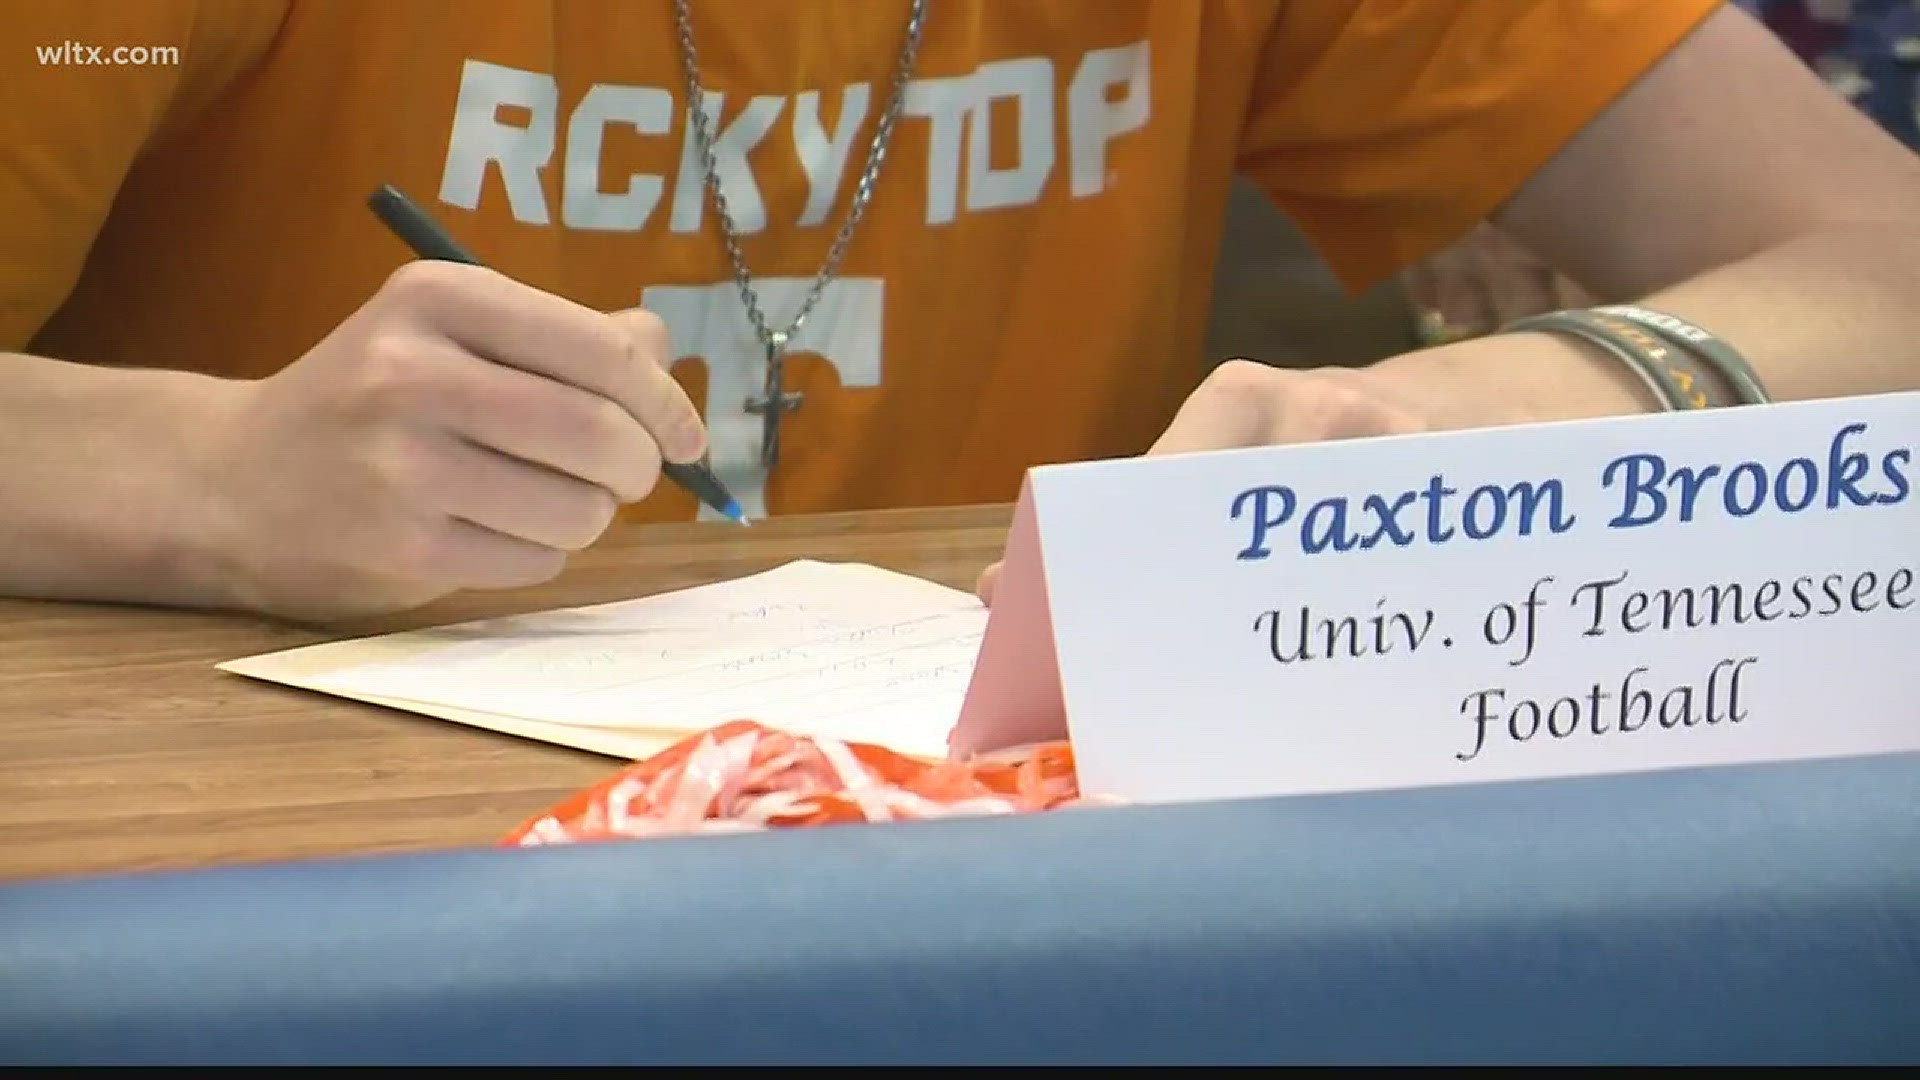 Airport's Paxton Brooks, a former News19 Player of the Week talks about signing with the Volunteers.